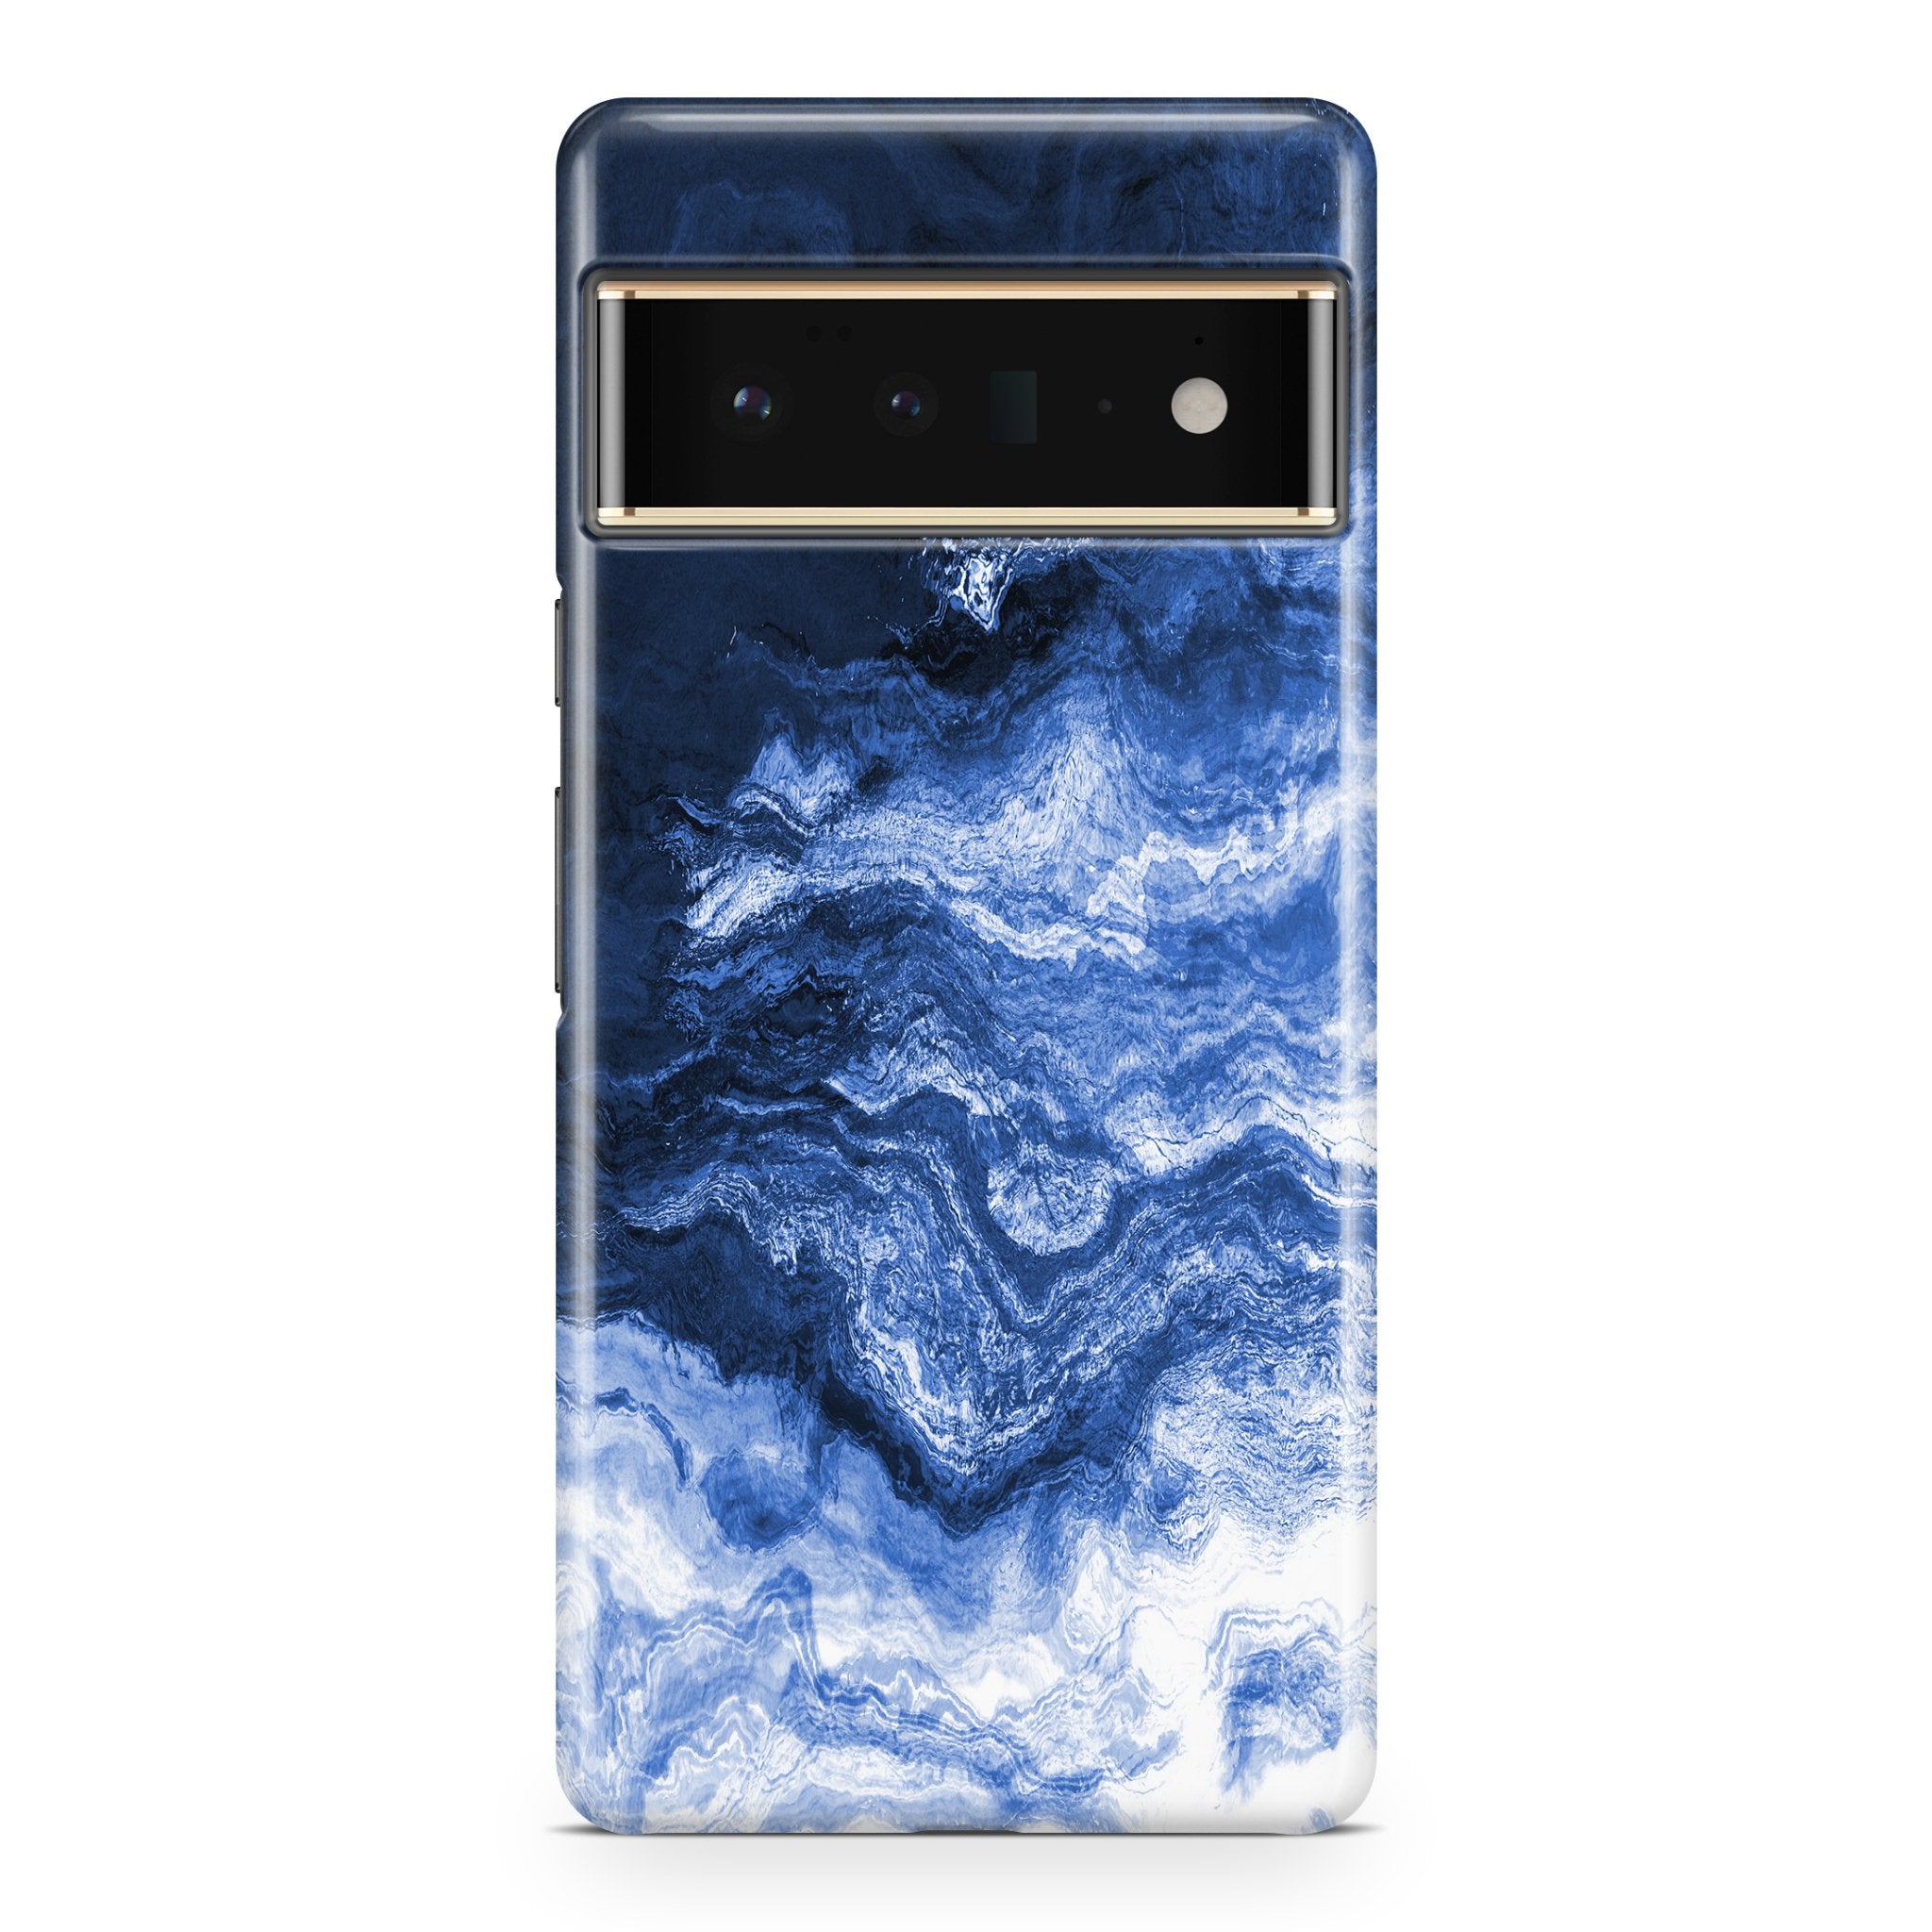 Blue Runner - Google phone case designs by CaseSwagger